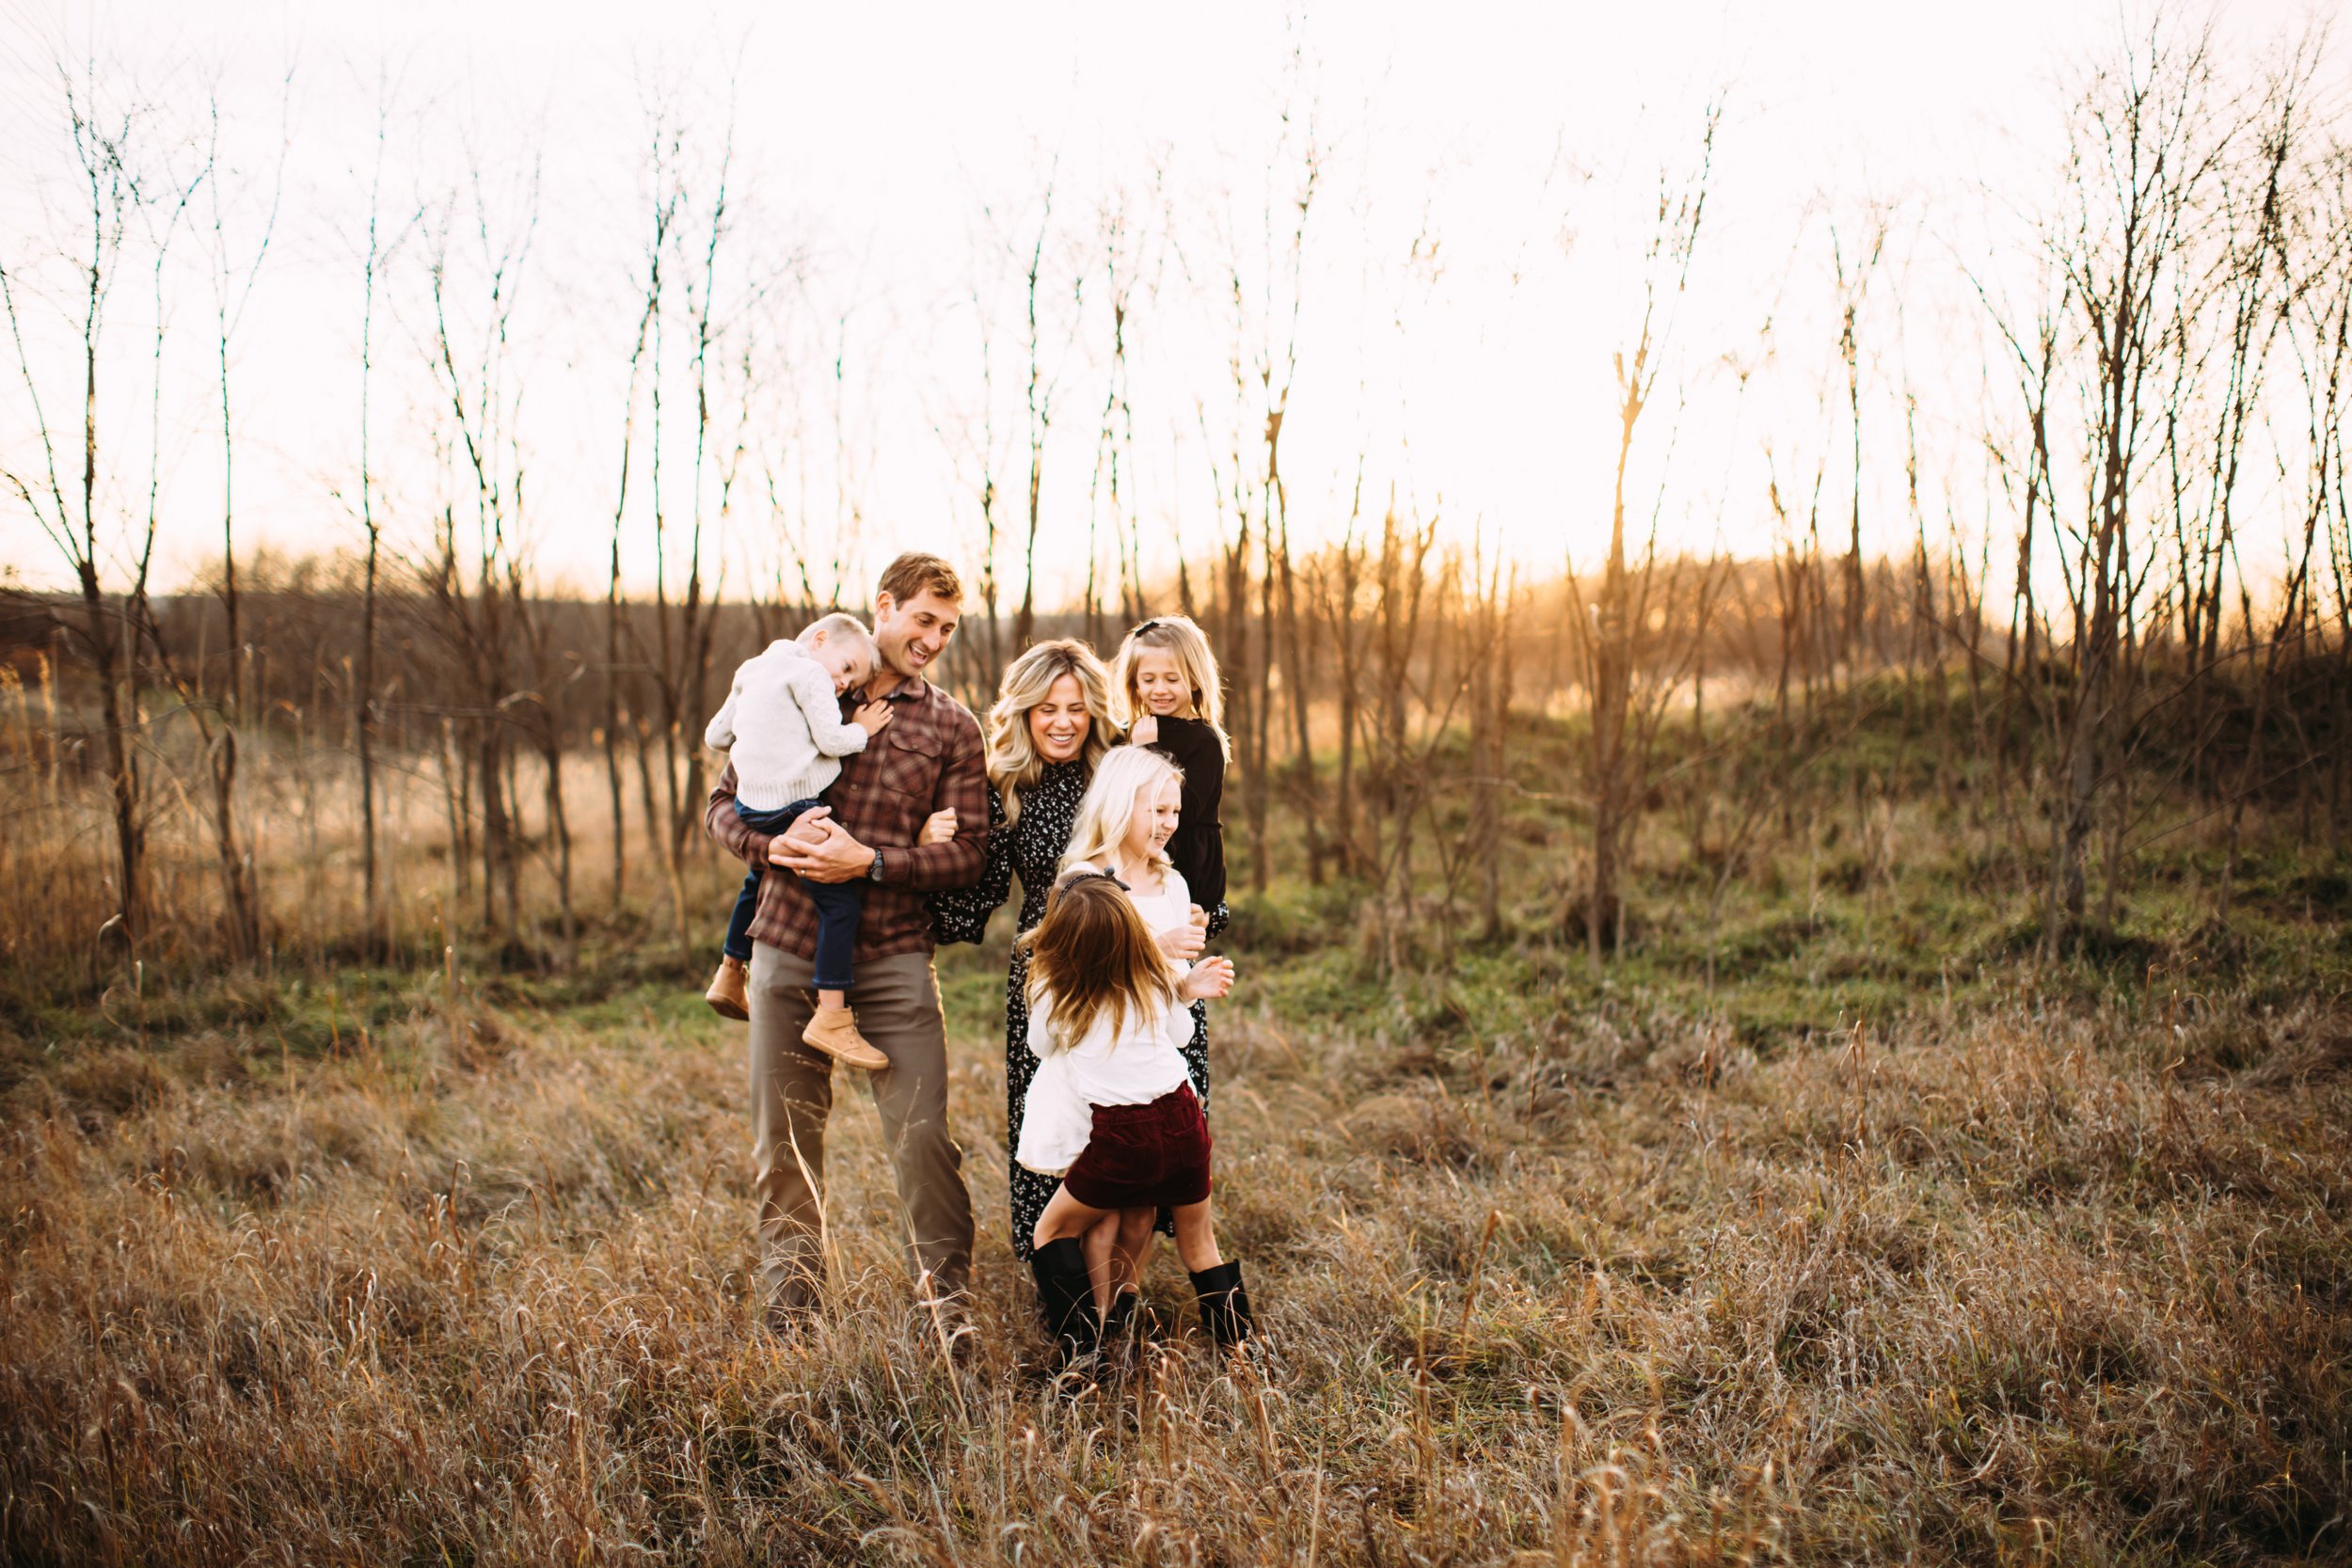  Fall family photo ideas in a grass field at Starved Rock State Park by Teala Ward Photography. fall family portraits family of six #TealaWardPhotography #TealaWardFamilies #StarvedRockStatePark #BuffaloRockPhotographers #UticaIllinoisphotographers 